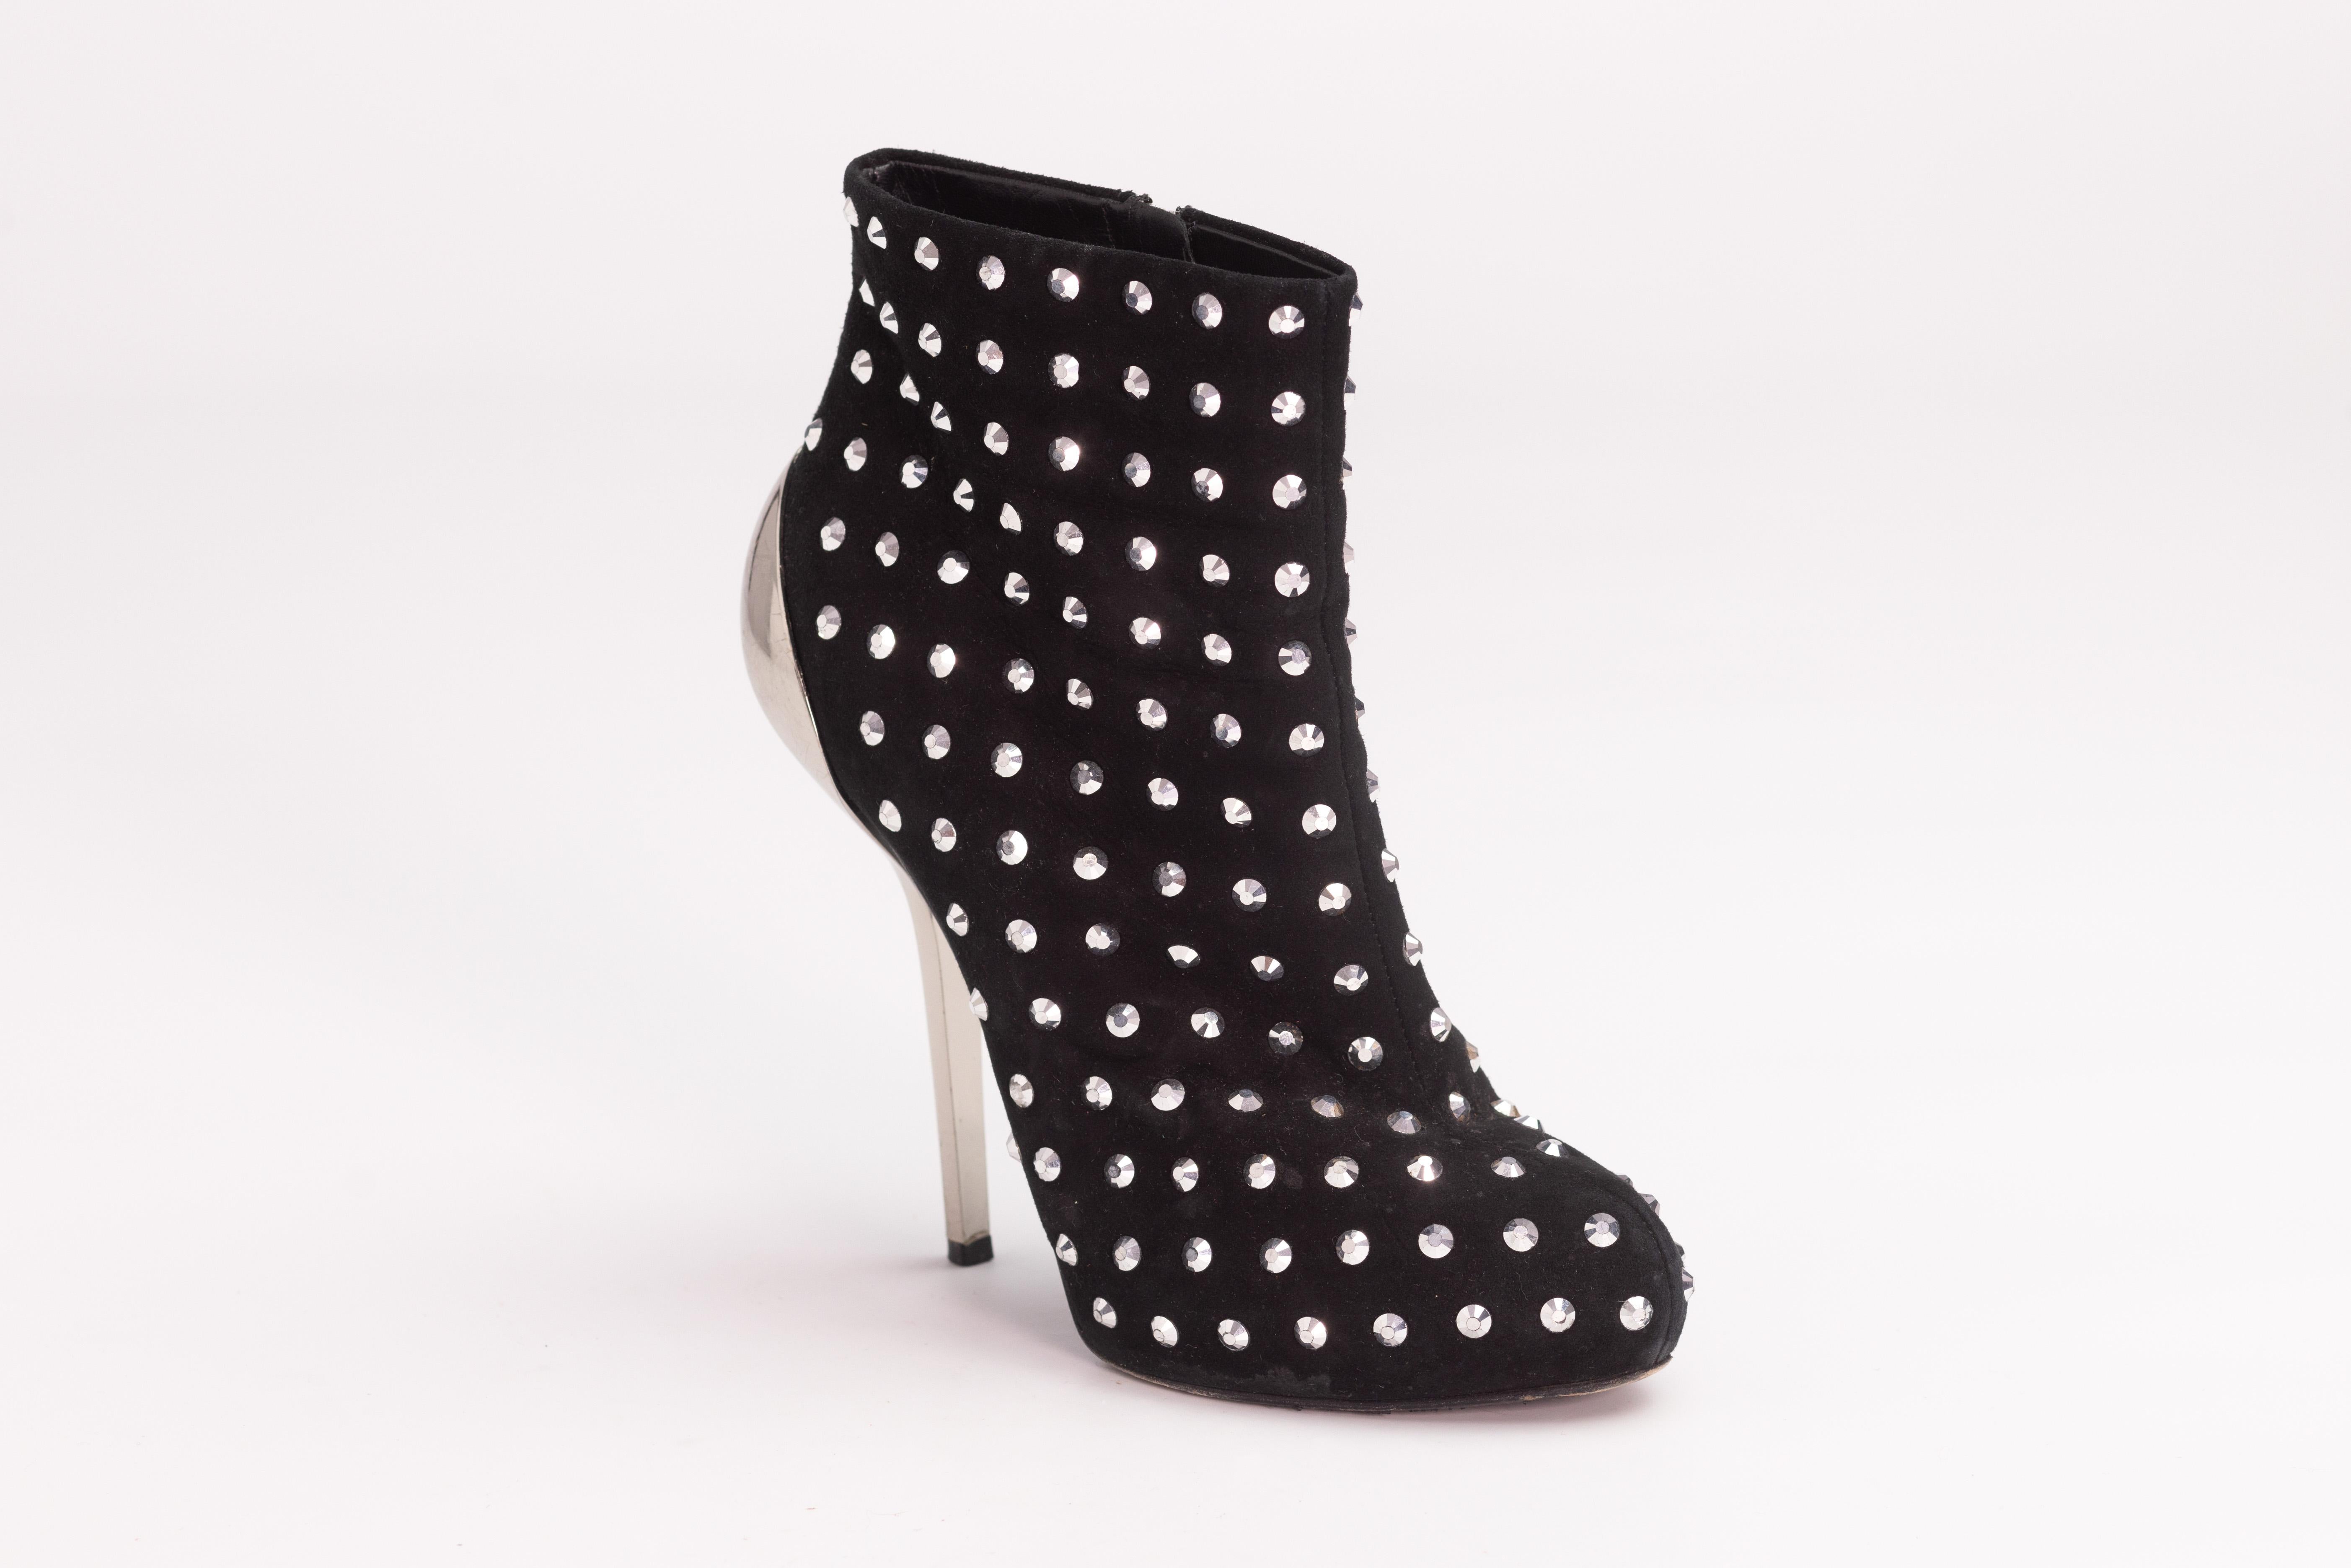 GIUSEPPE ZANOTTI BLACK SUEDE CRYSTAL EMBELLISHED BOOTS (EU 38)

Color: Black
Material: Suede with crystal embellishments
Size: 38 EU / 7 US
Heel Height: 125 mm / 5”
Platform Height: 25 mm / 1” 
Condition: Good. Scratches, scuffs and wear to the